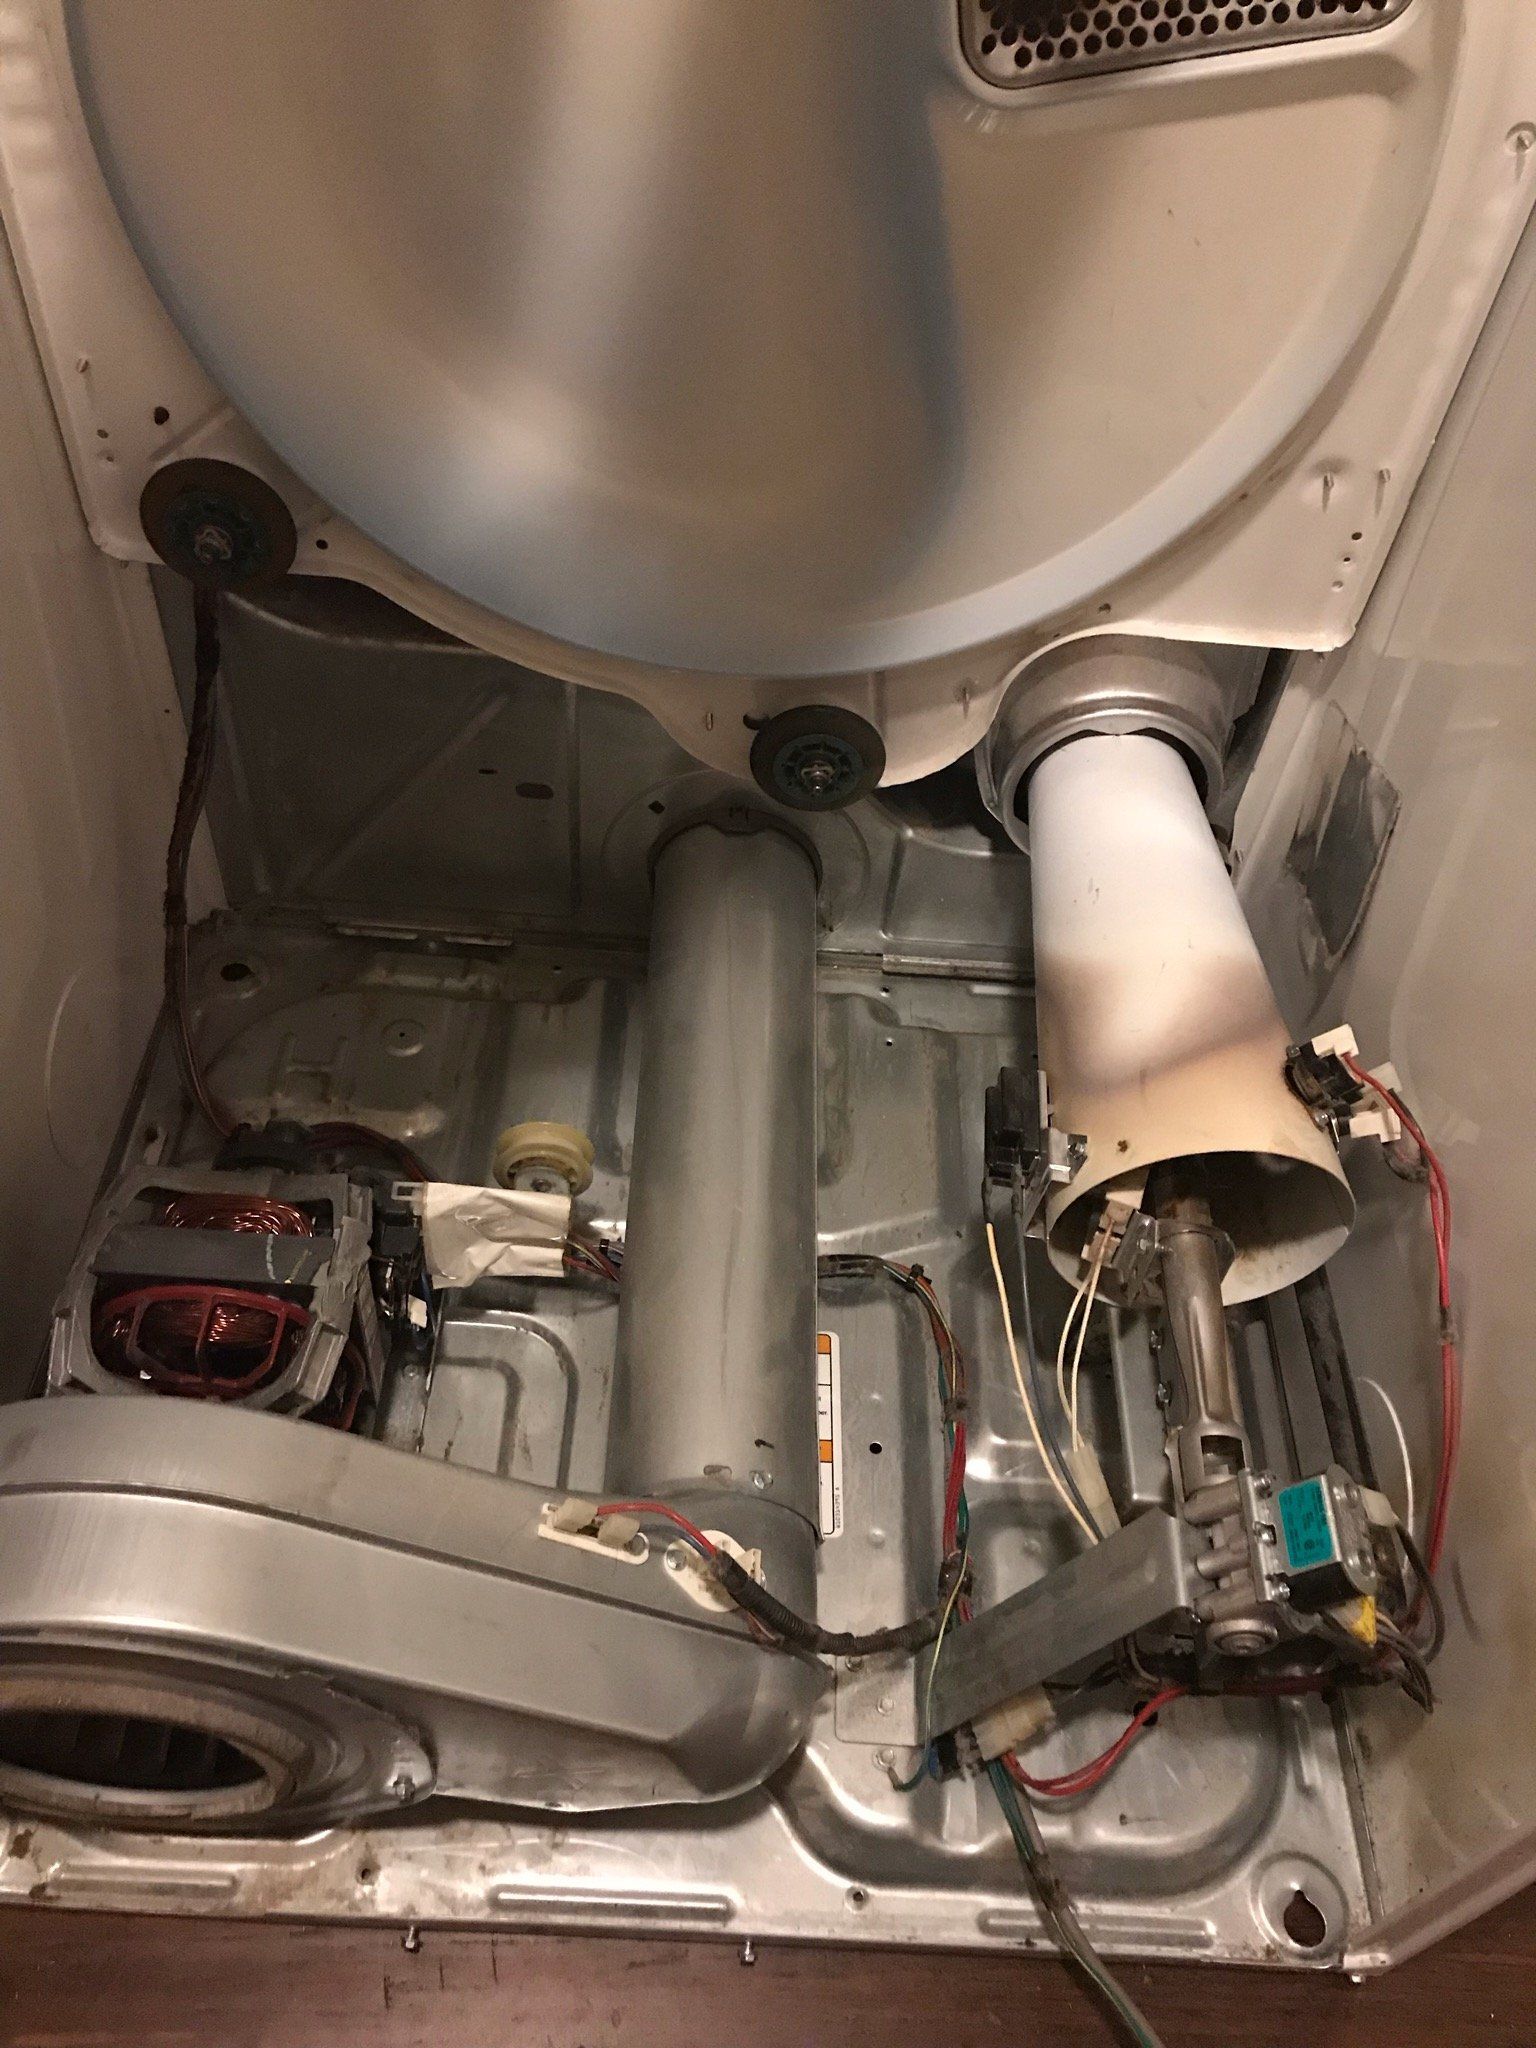 clean dryer will run safely and smoothly